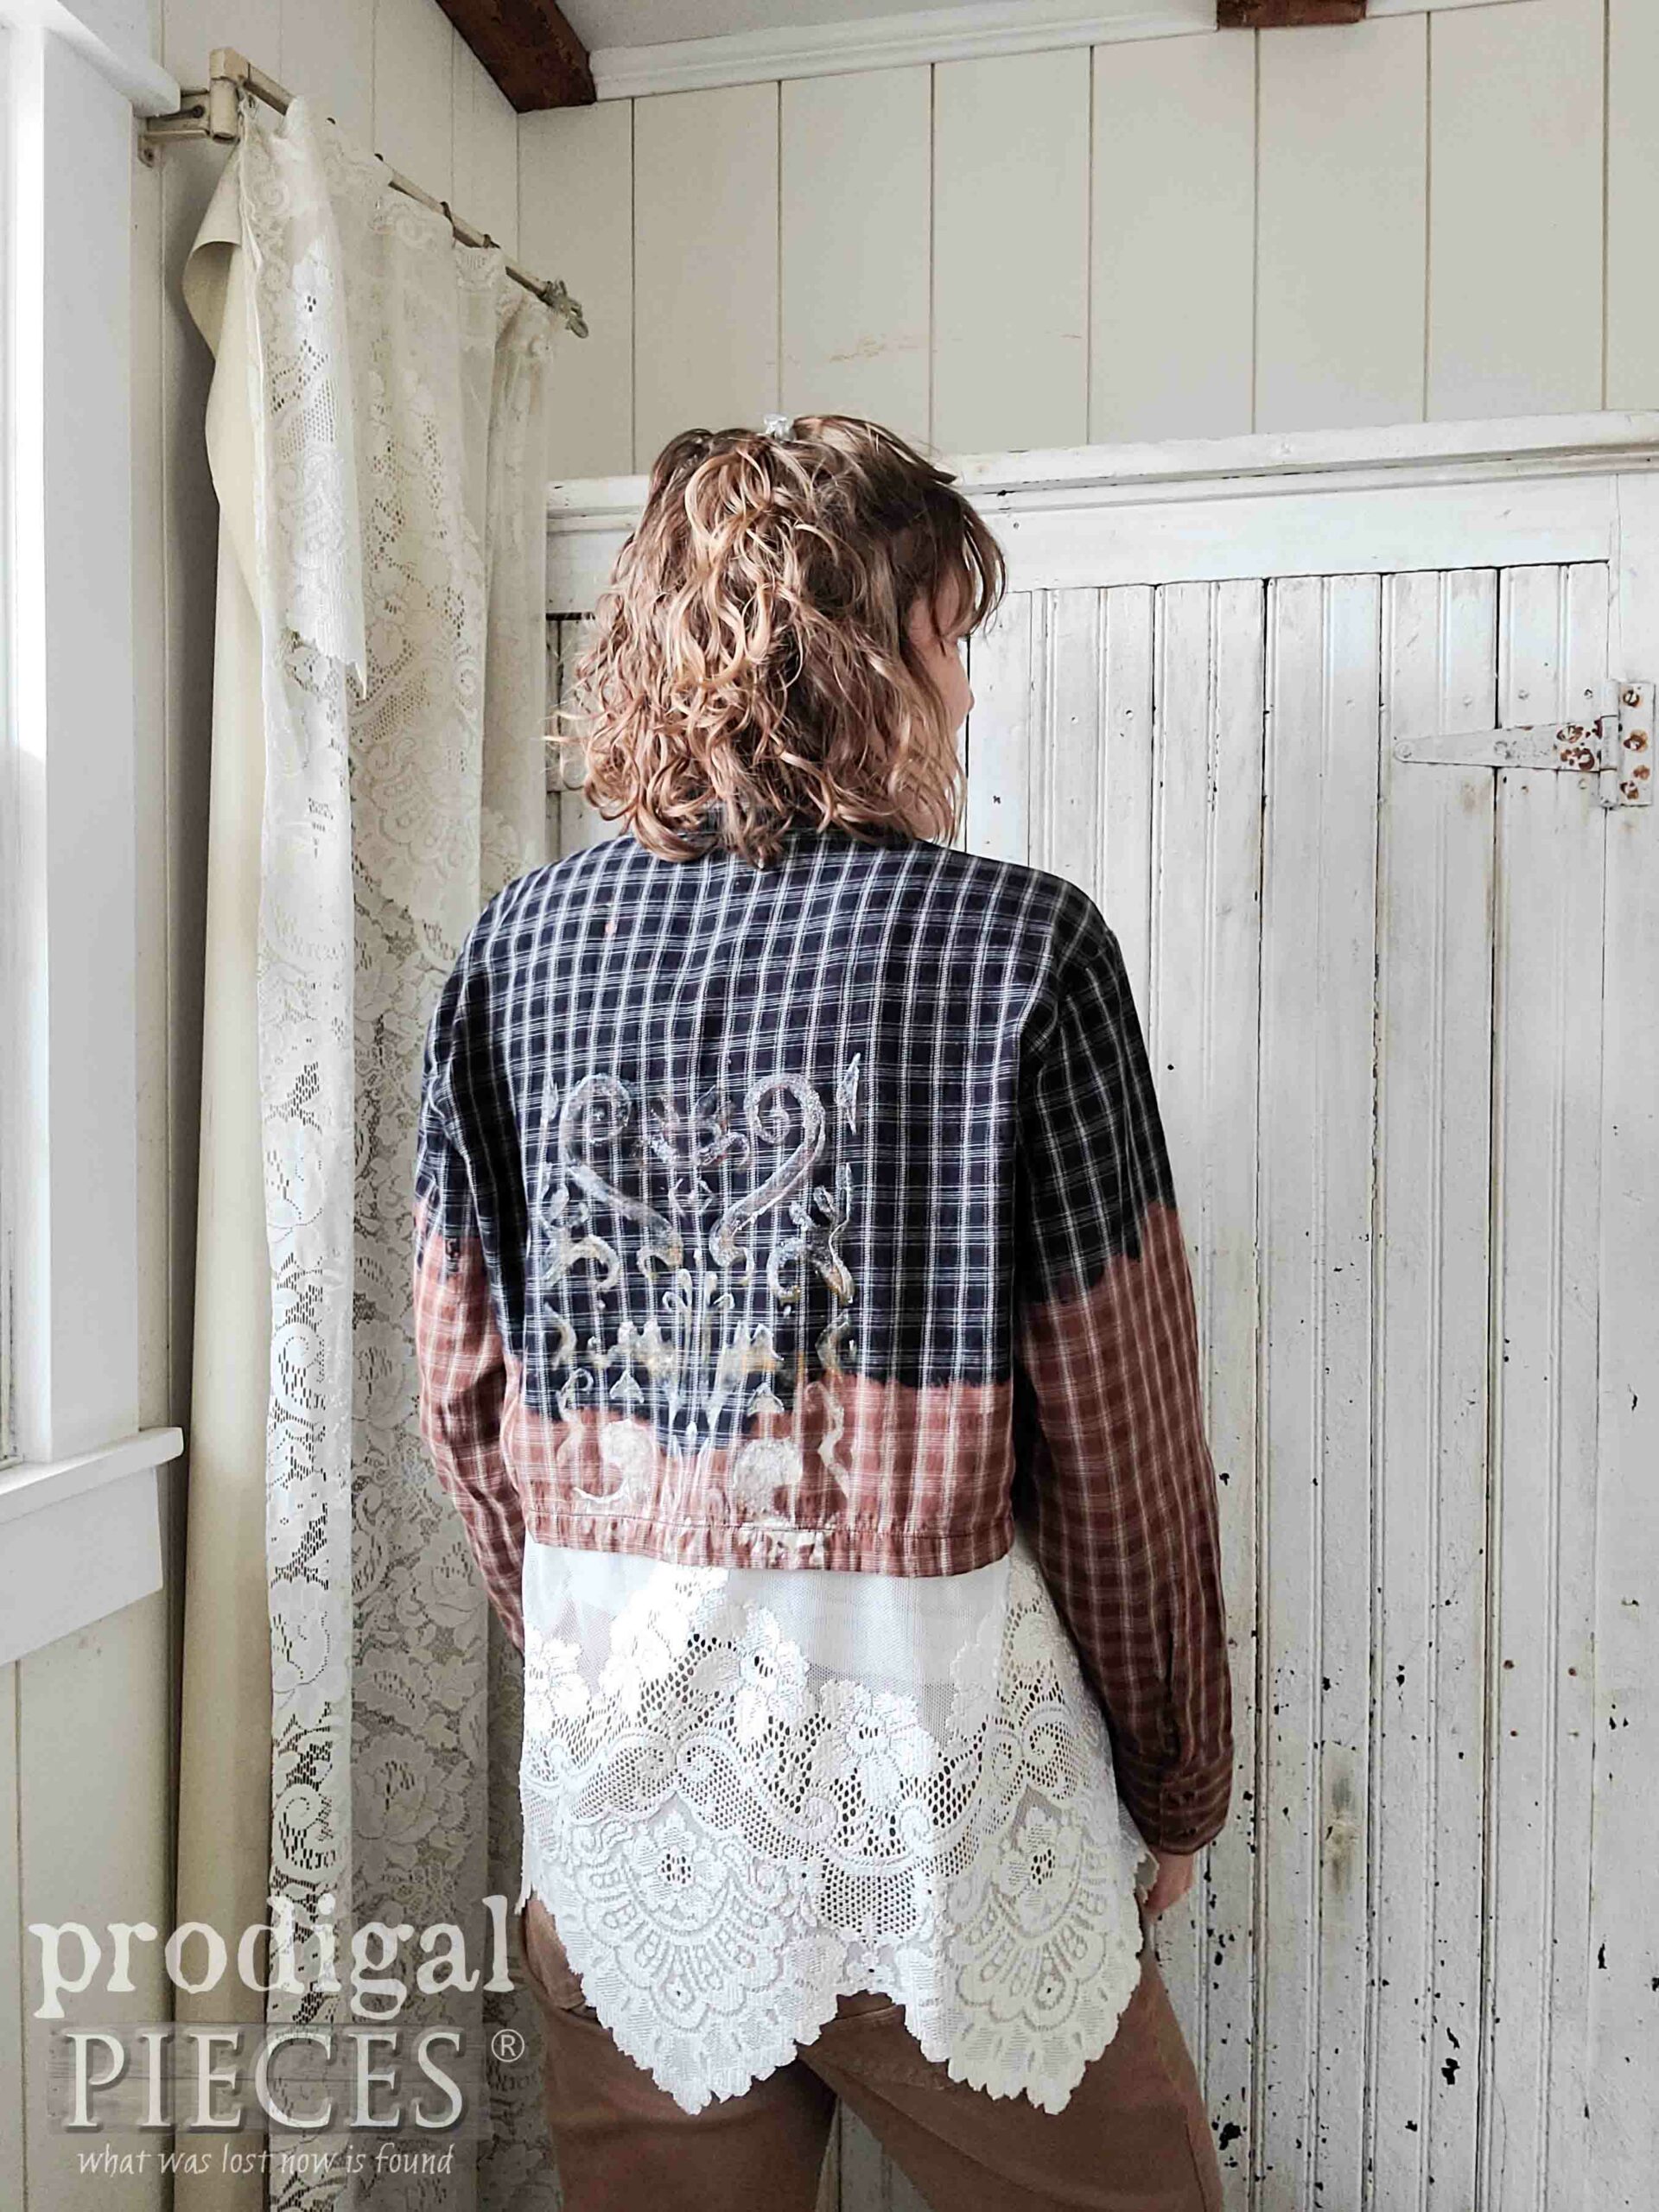 Refashioned Bleached Shirt Tutorial with Curtain Valance by Larissa of Prodigal Pieces | prodigalpieces.com #prodigalpieces